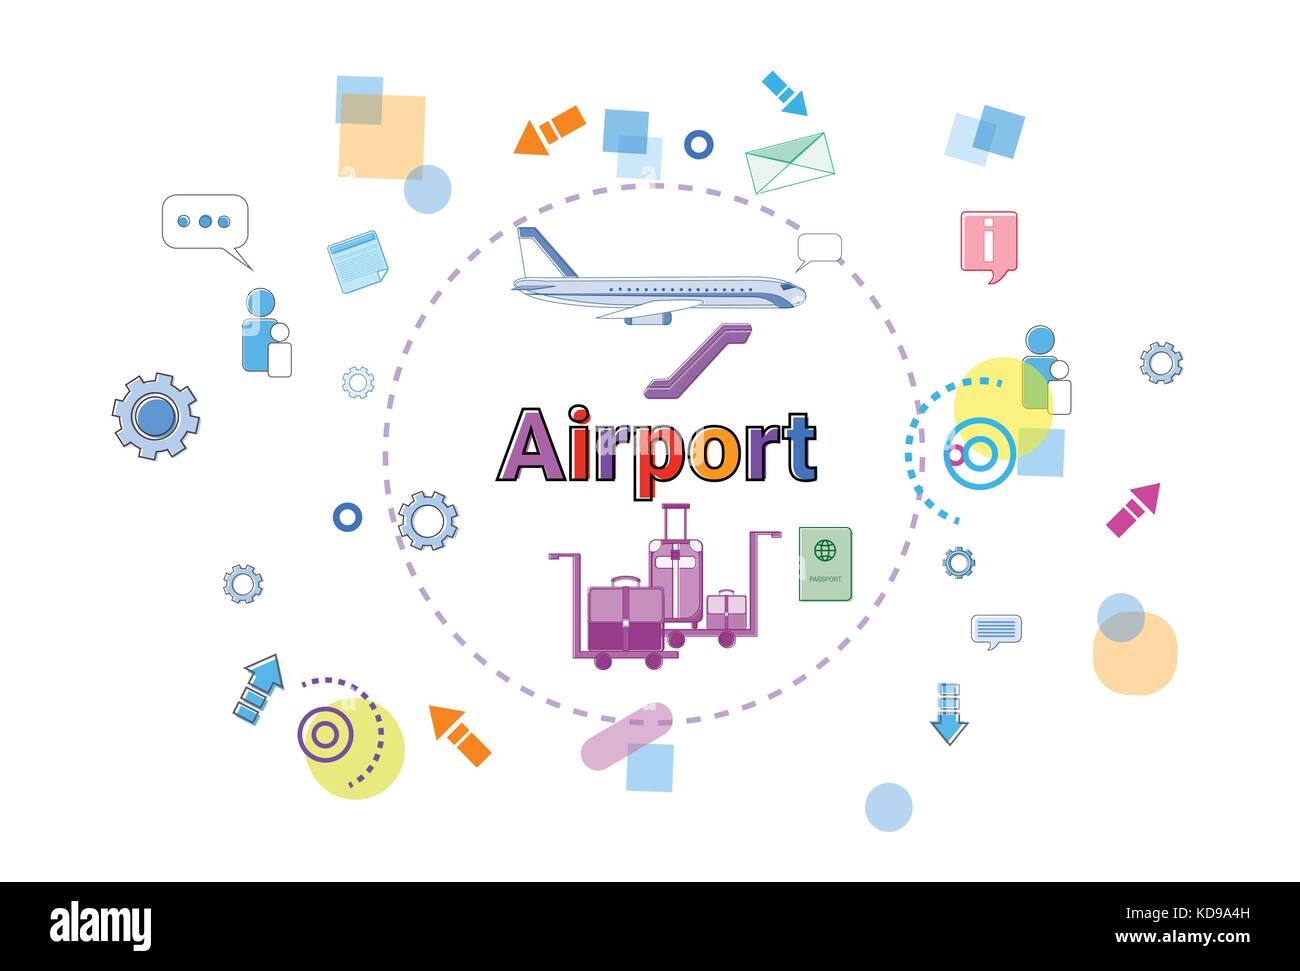 Airport Concept Airplane Transportation Air Tourism Web Banner Stock Vector